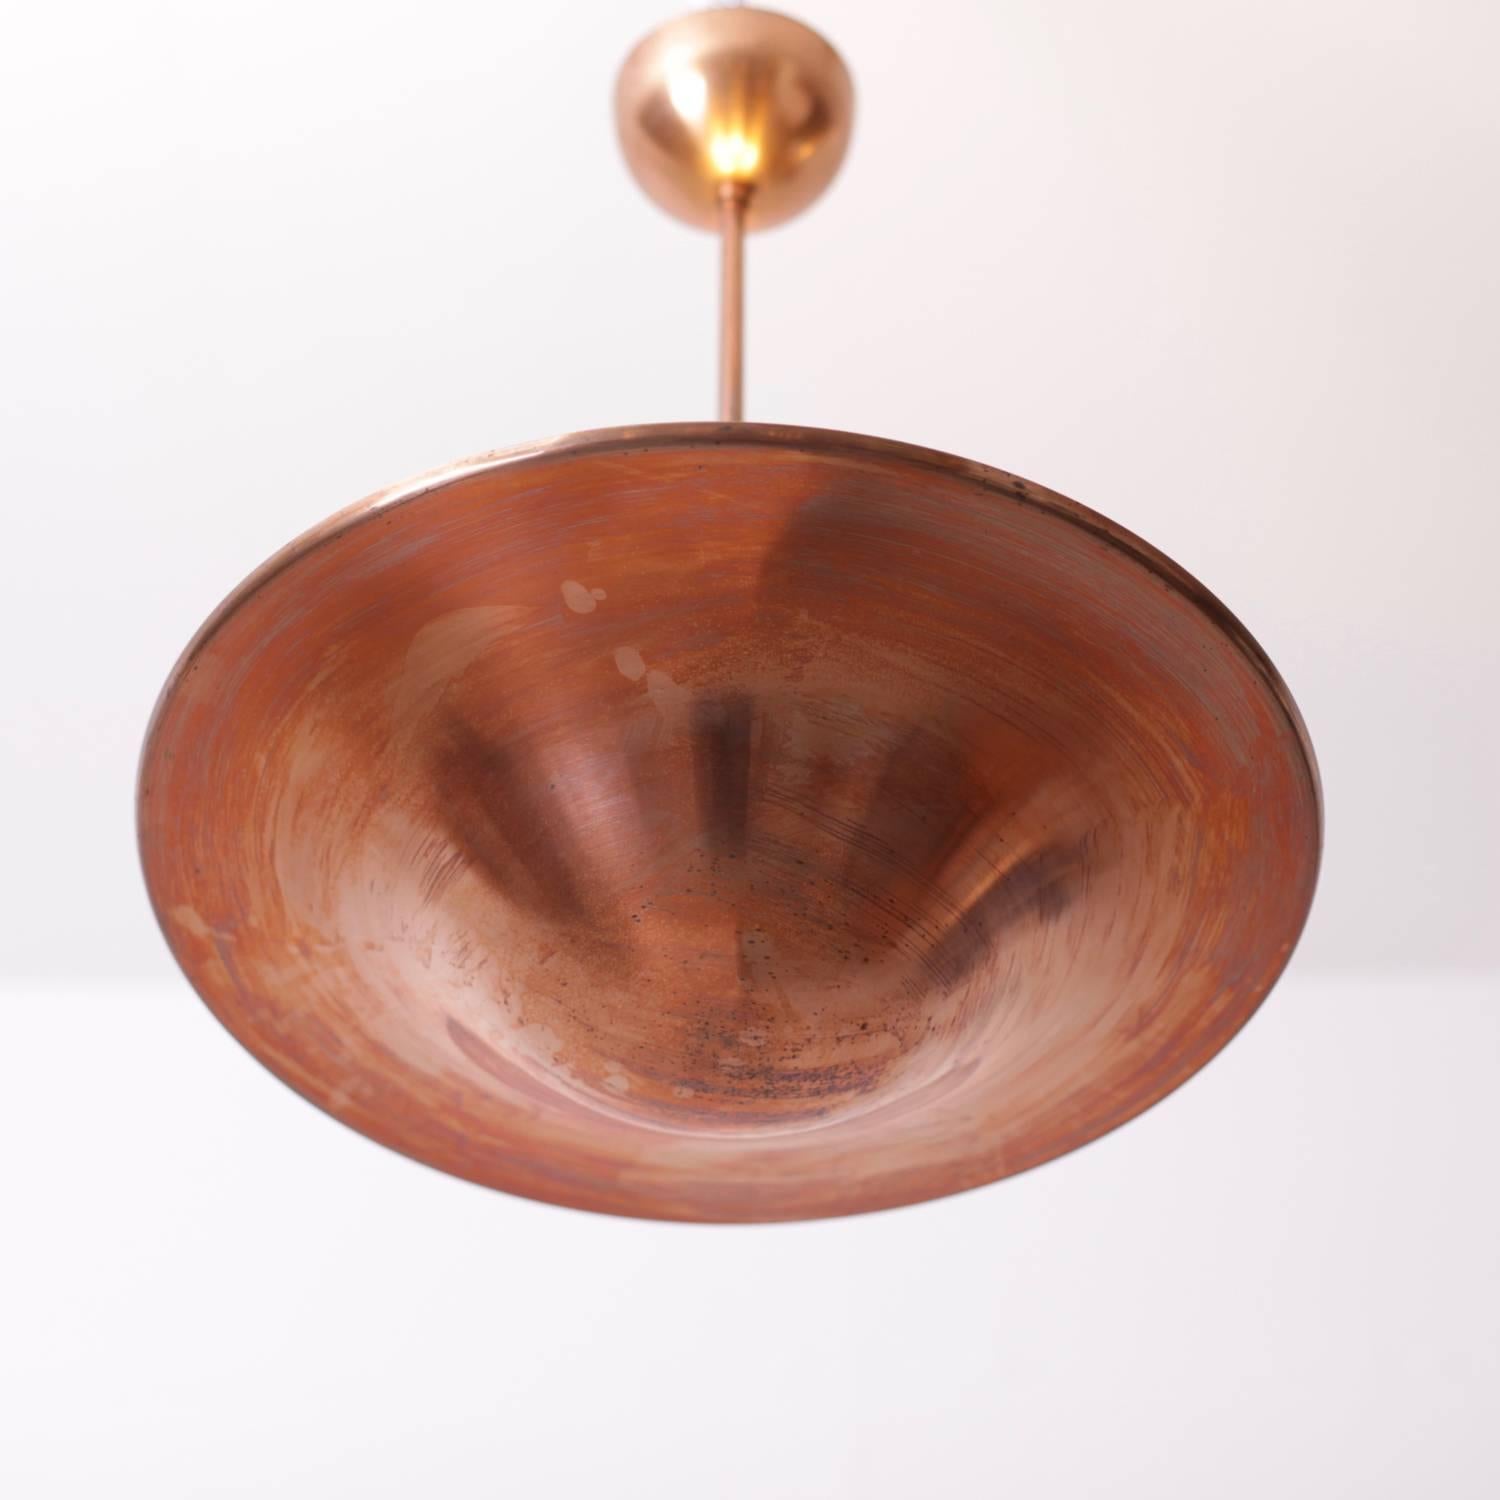 German Copper Pendant Lamp from the 1930s, Functionalism, in Excellent Condition